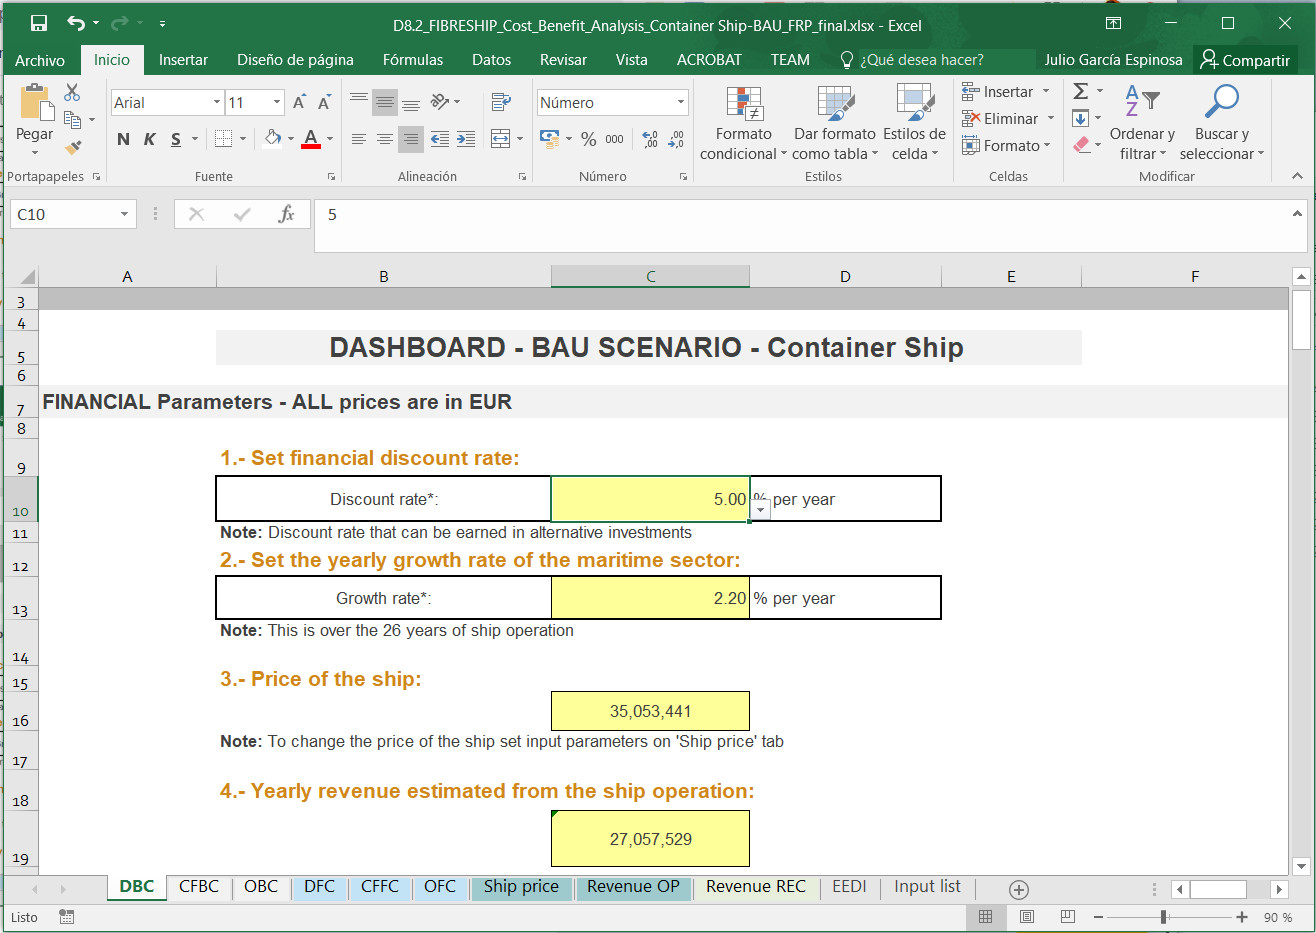 D8.2 Cost Benefit Analysis Tool of the Container Ship